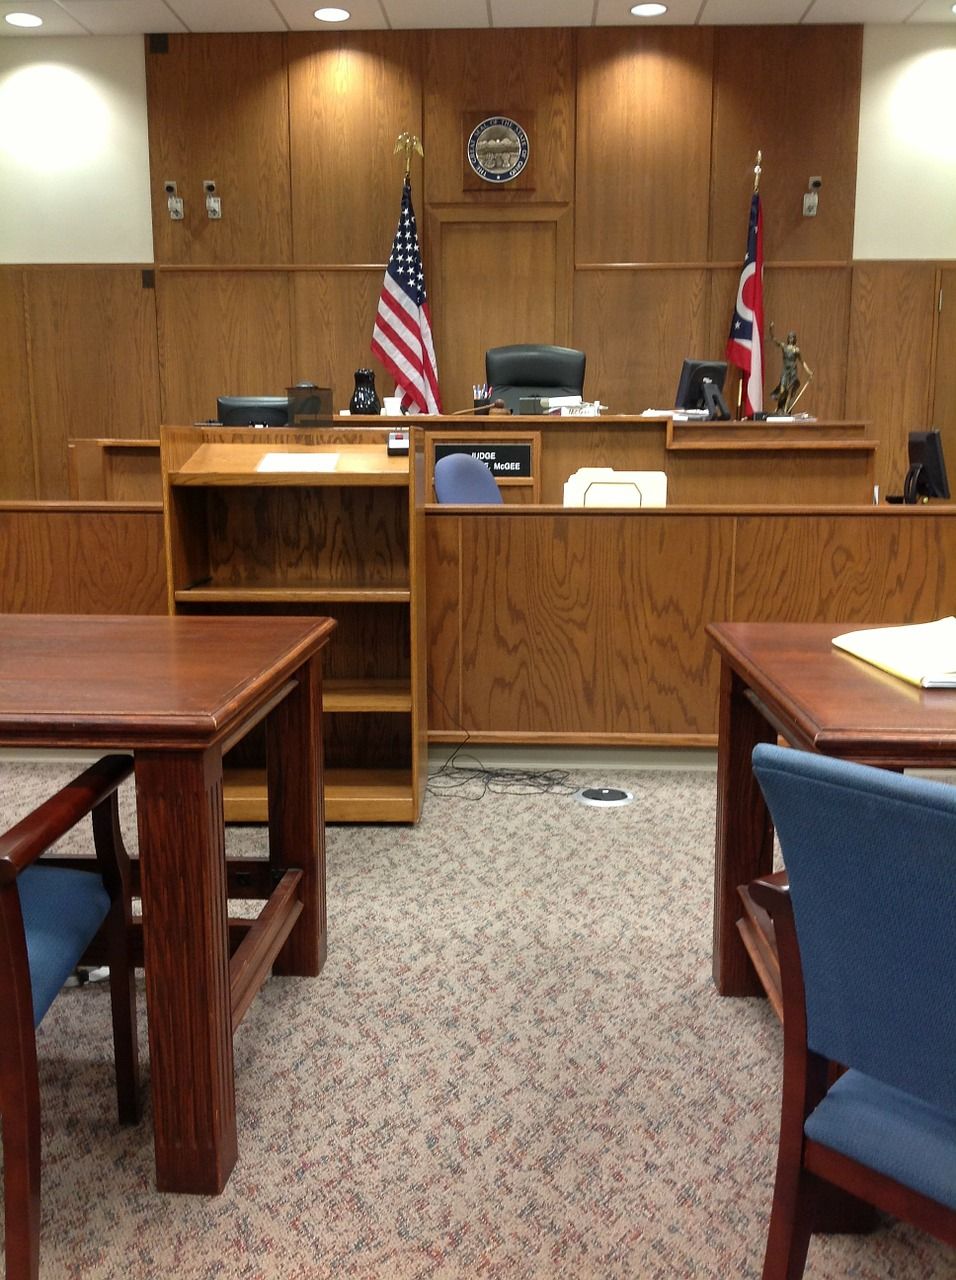 judge's seat and front of courtroom